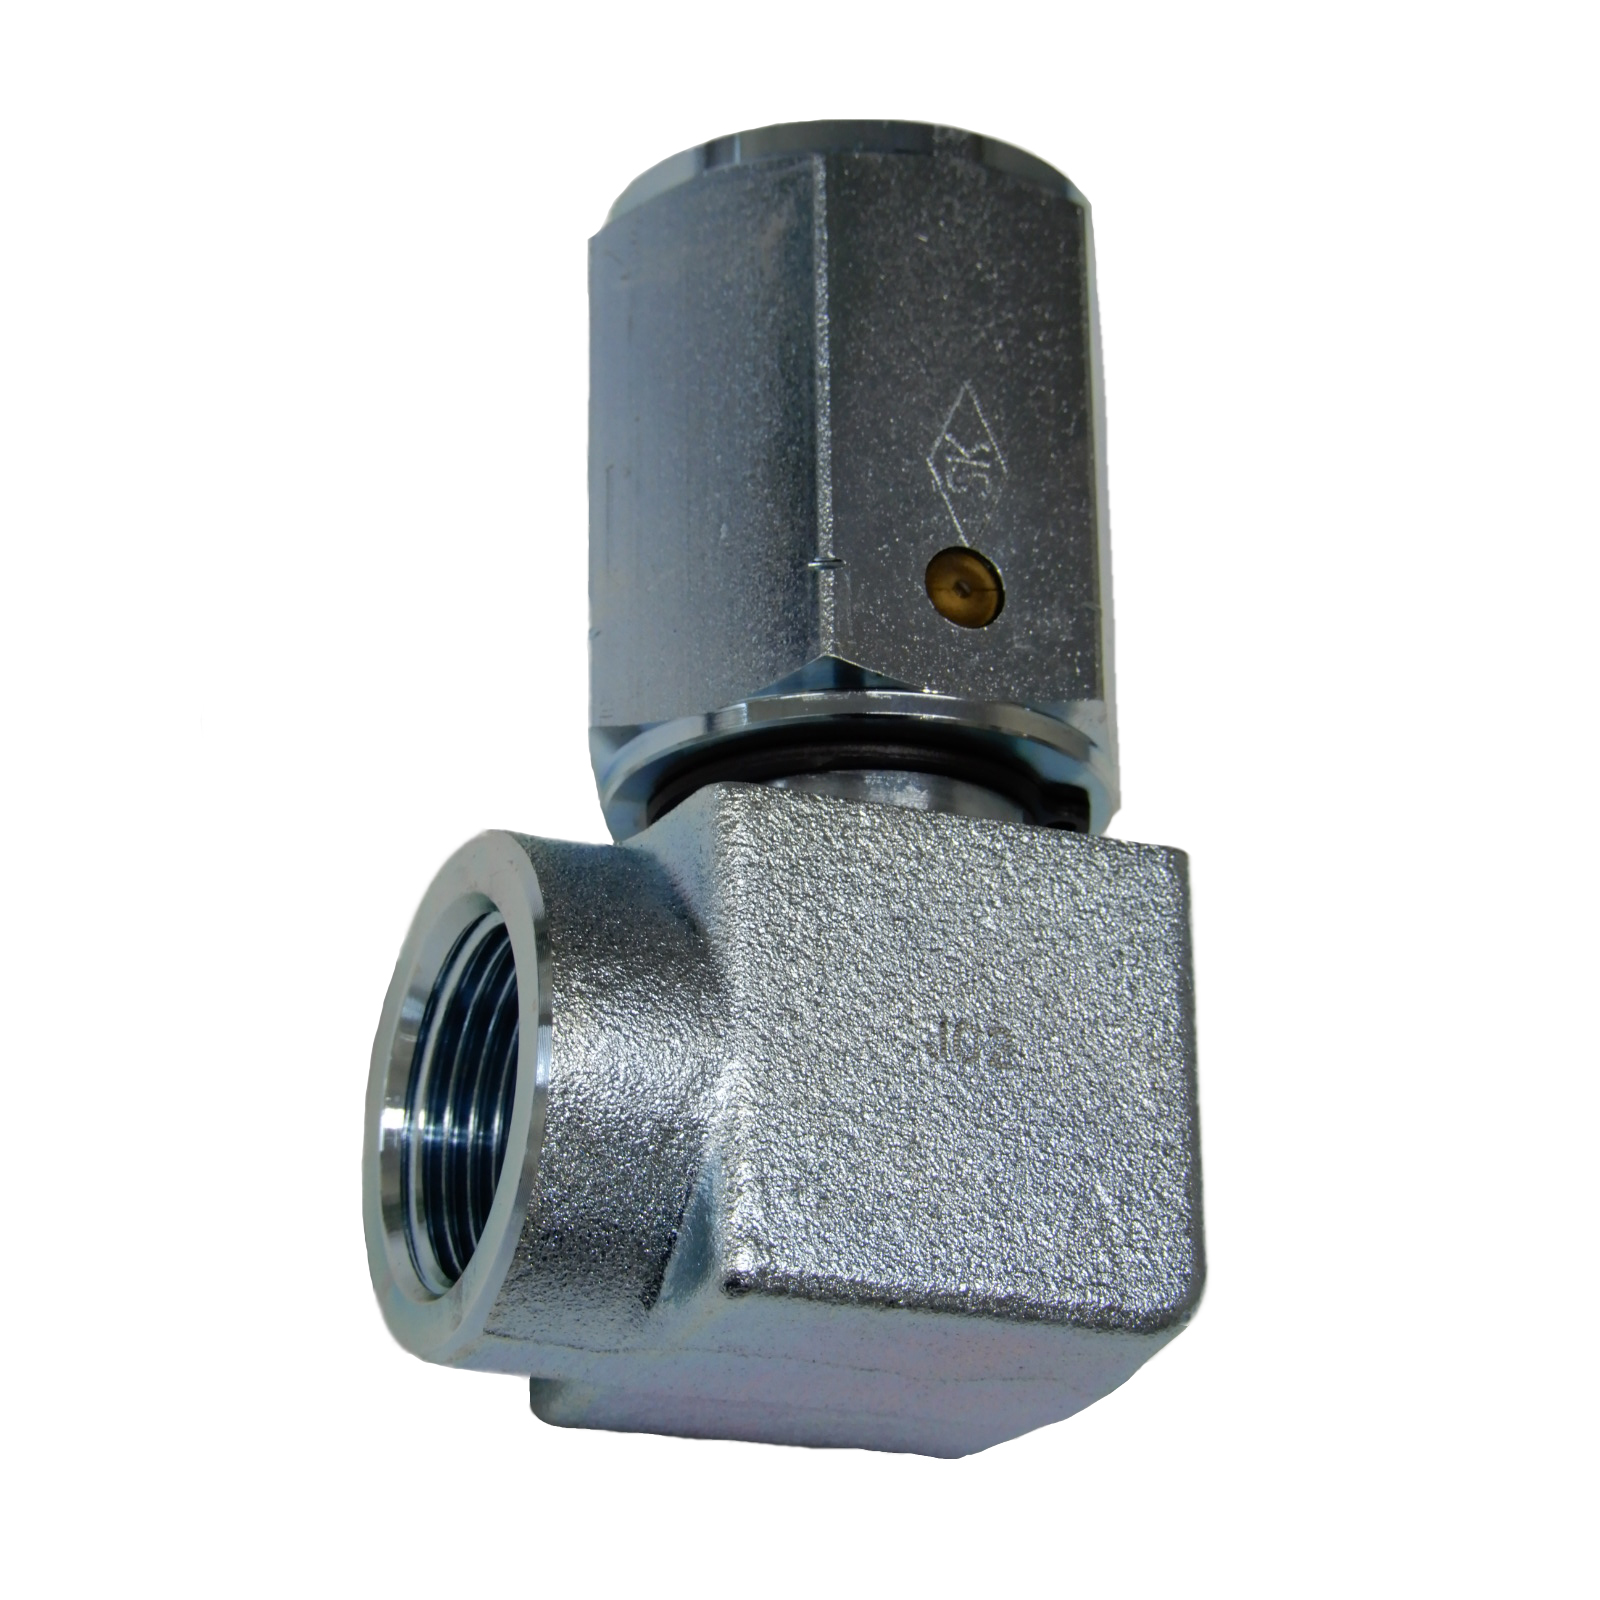 Hydraulic Hose Adapters - Elbow 90° Swivel Adapter, Female BSPT to Female BSPT, SK Type, SKL-30 Series